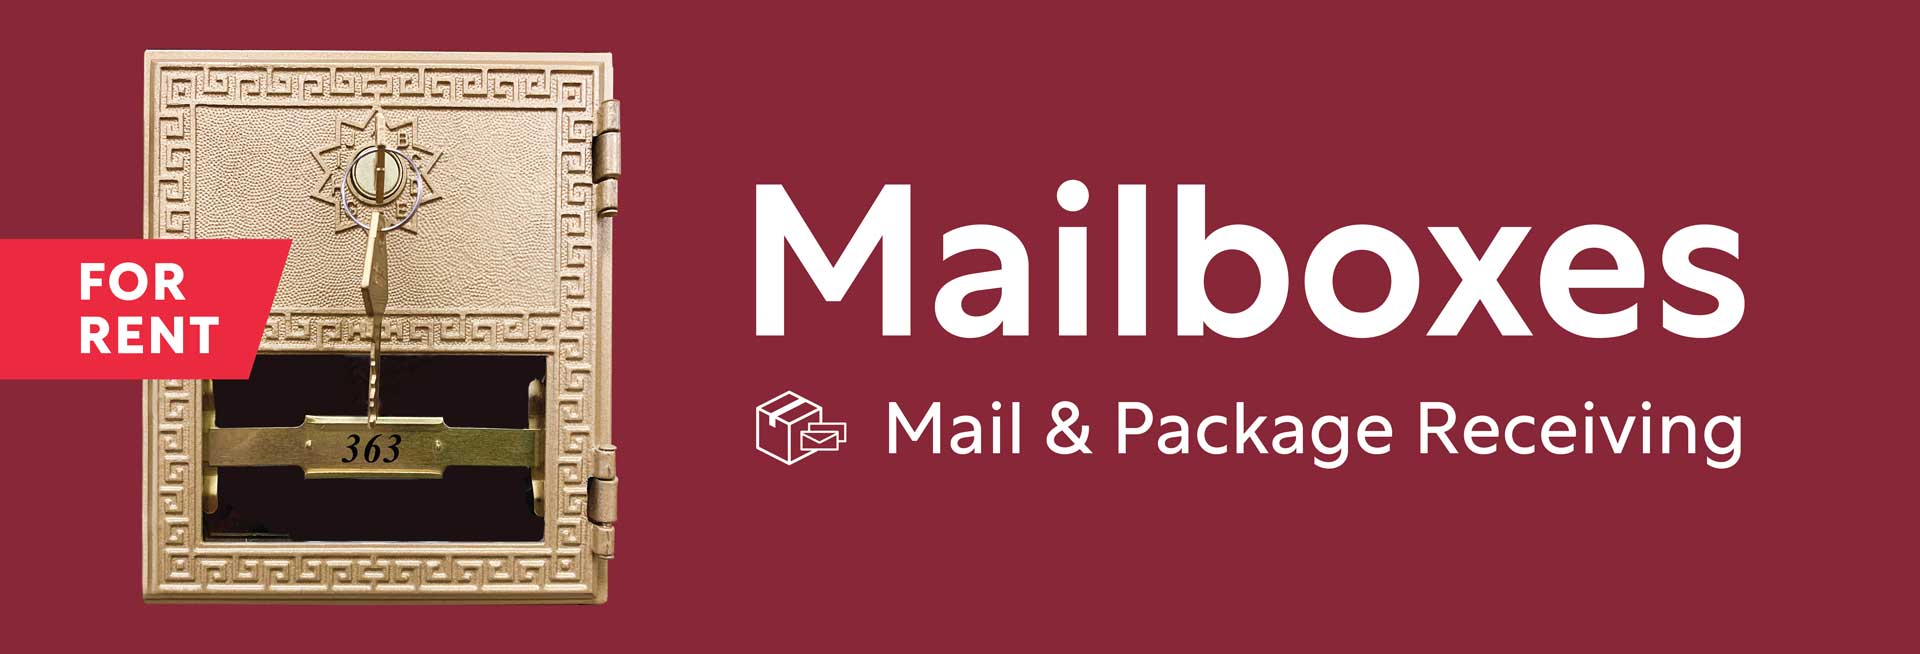 Mailboxes - Mail and Package Receiving